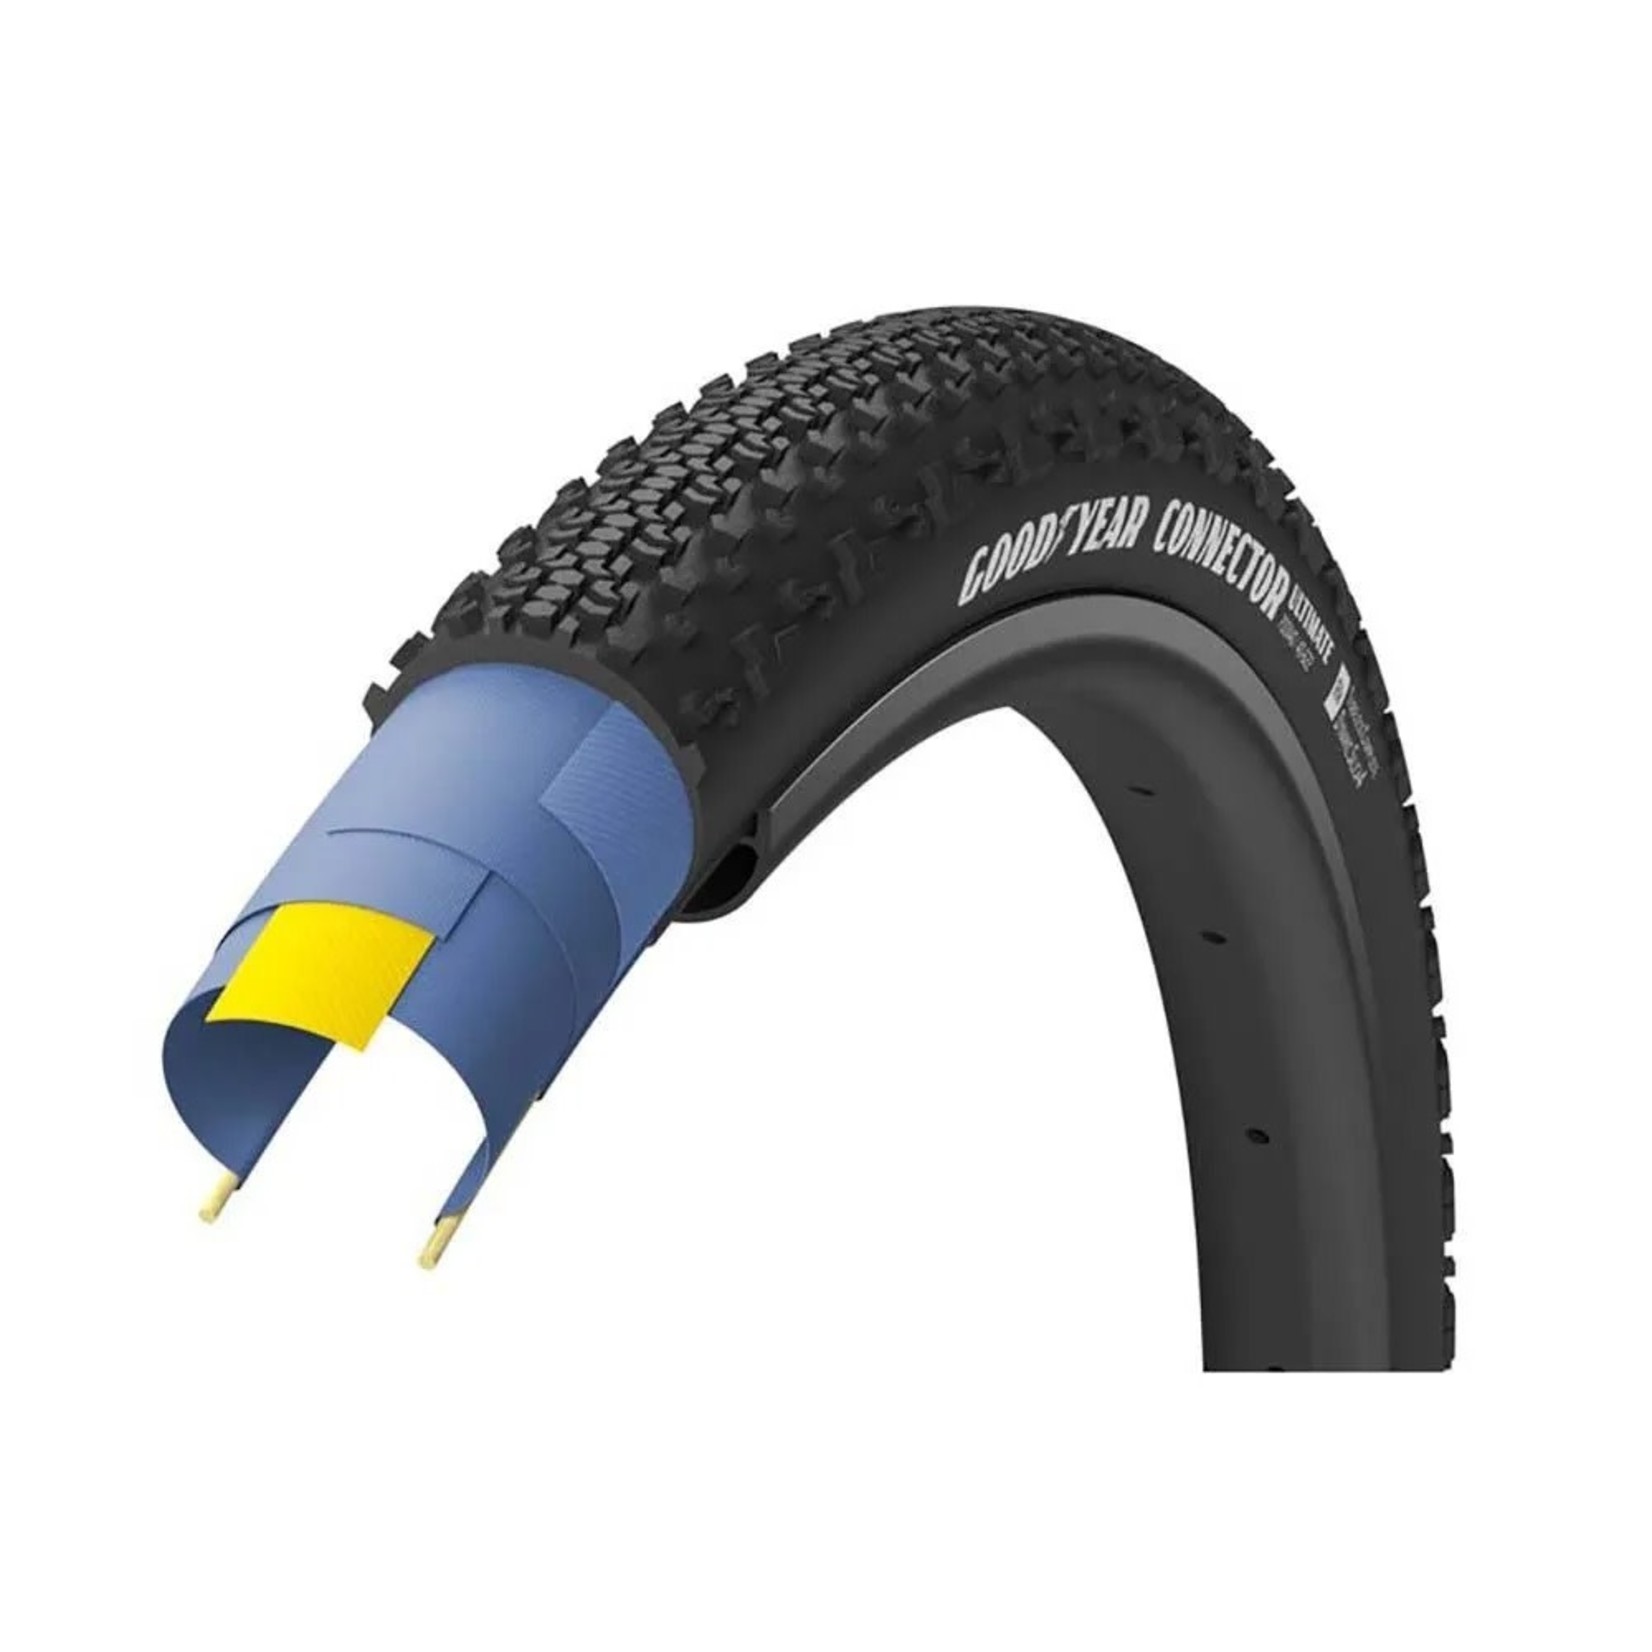 GOODYEAR GOODYEAR CONNECTOR ULTIMATE TUBELESS SIL4